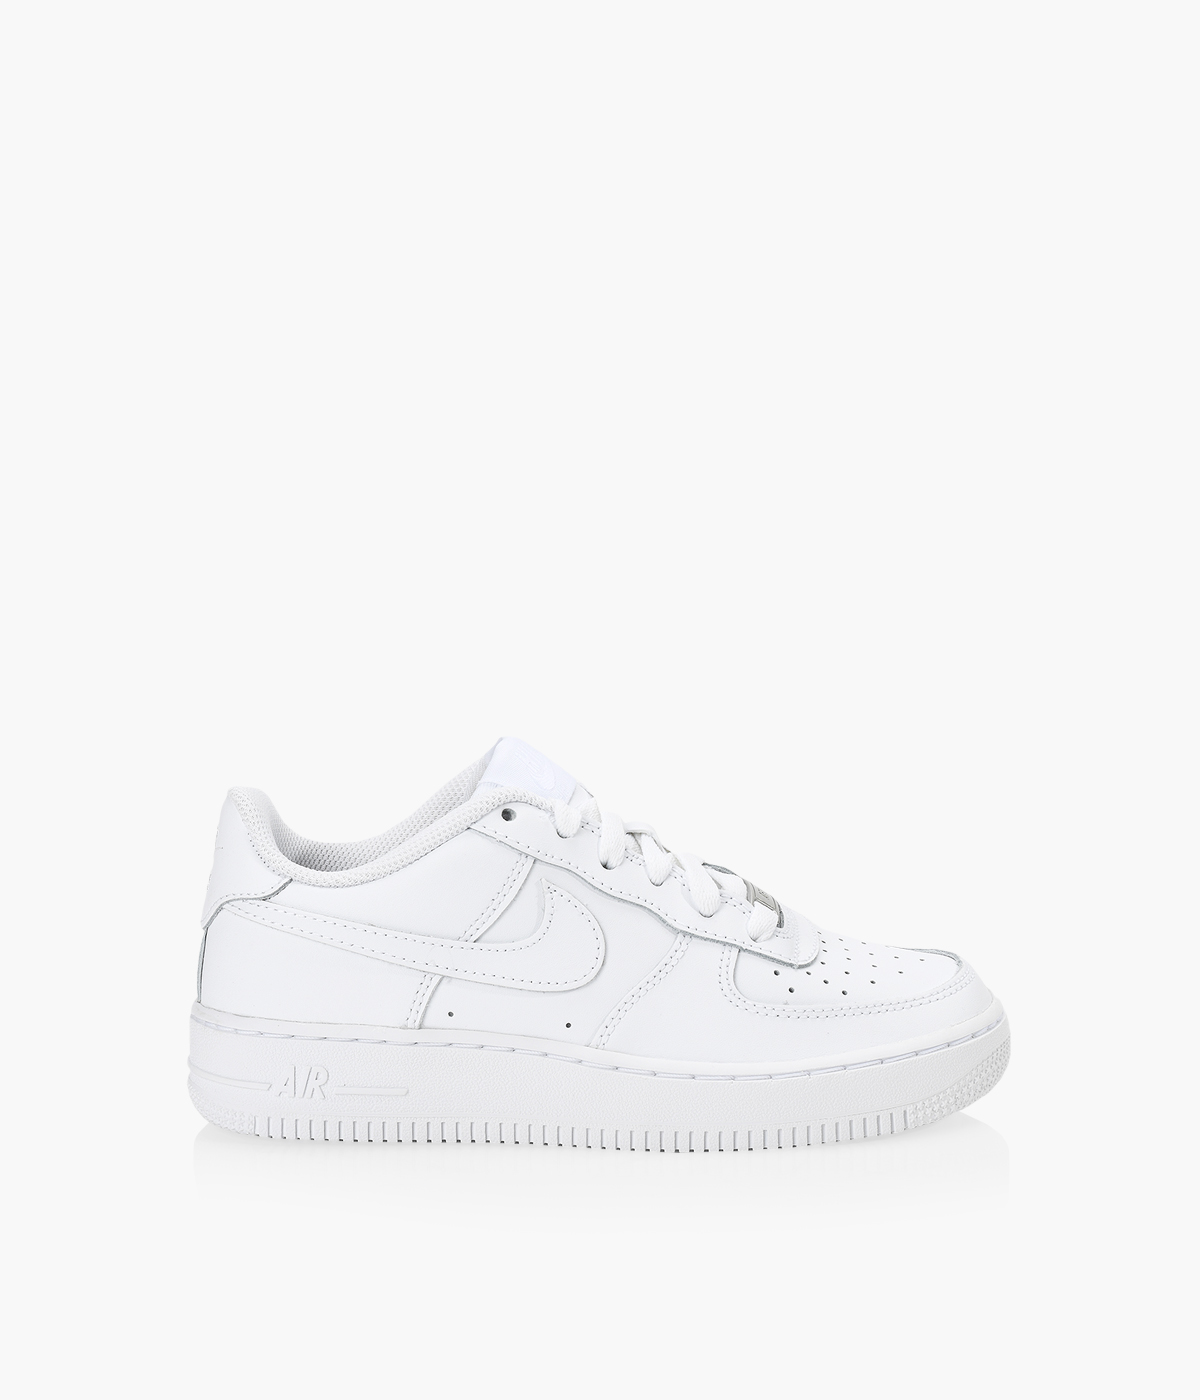 size 6 white air forces